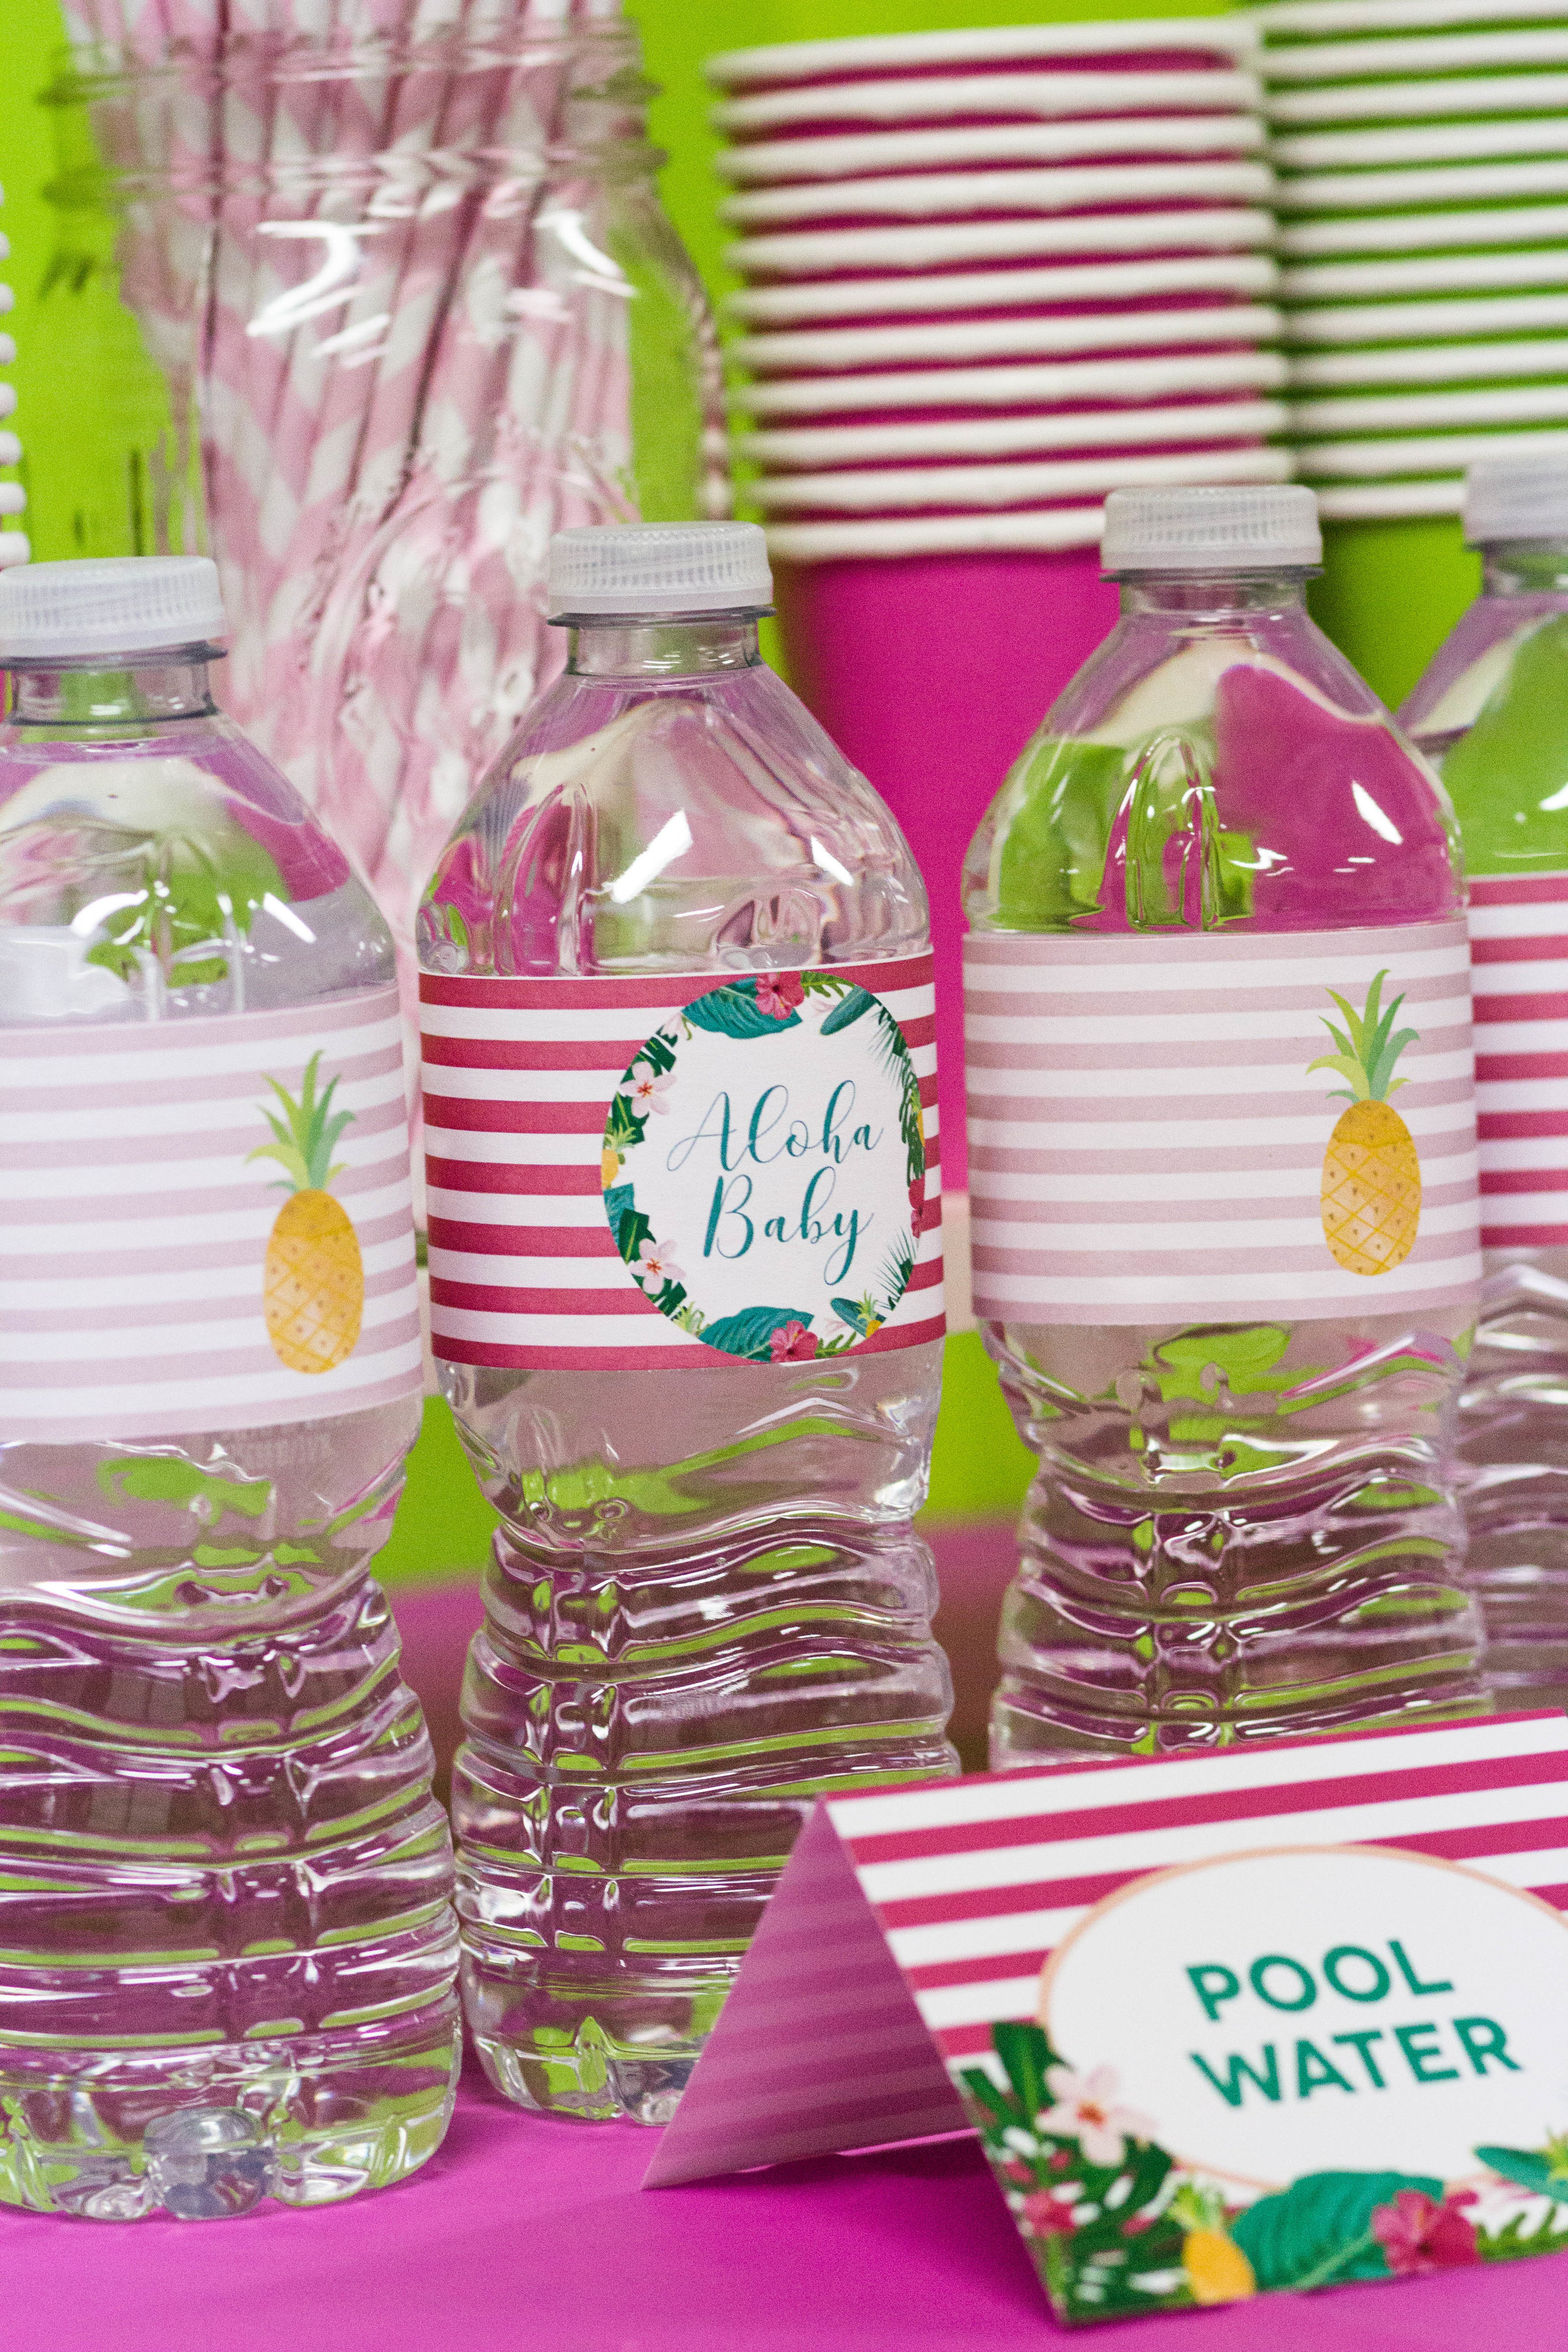 Flamingo bottle wrappers from a flamingo themed baby shower // designs from shopmkkm.com